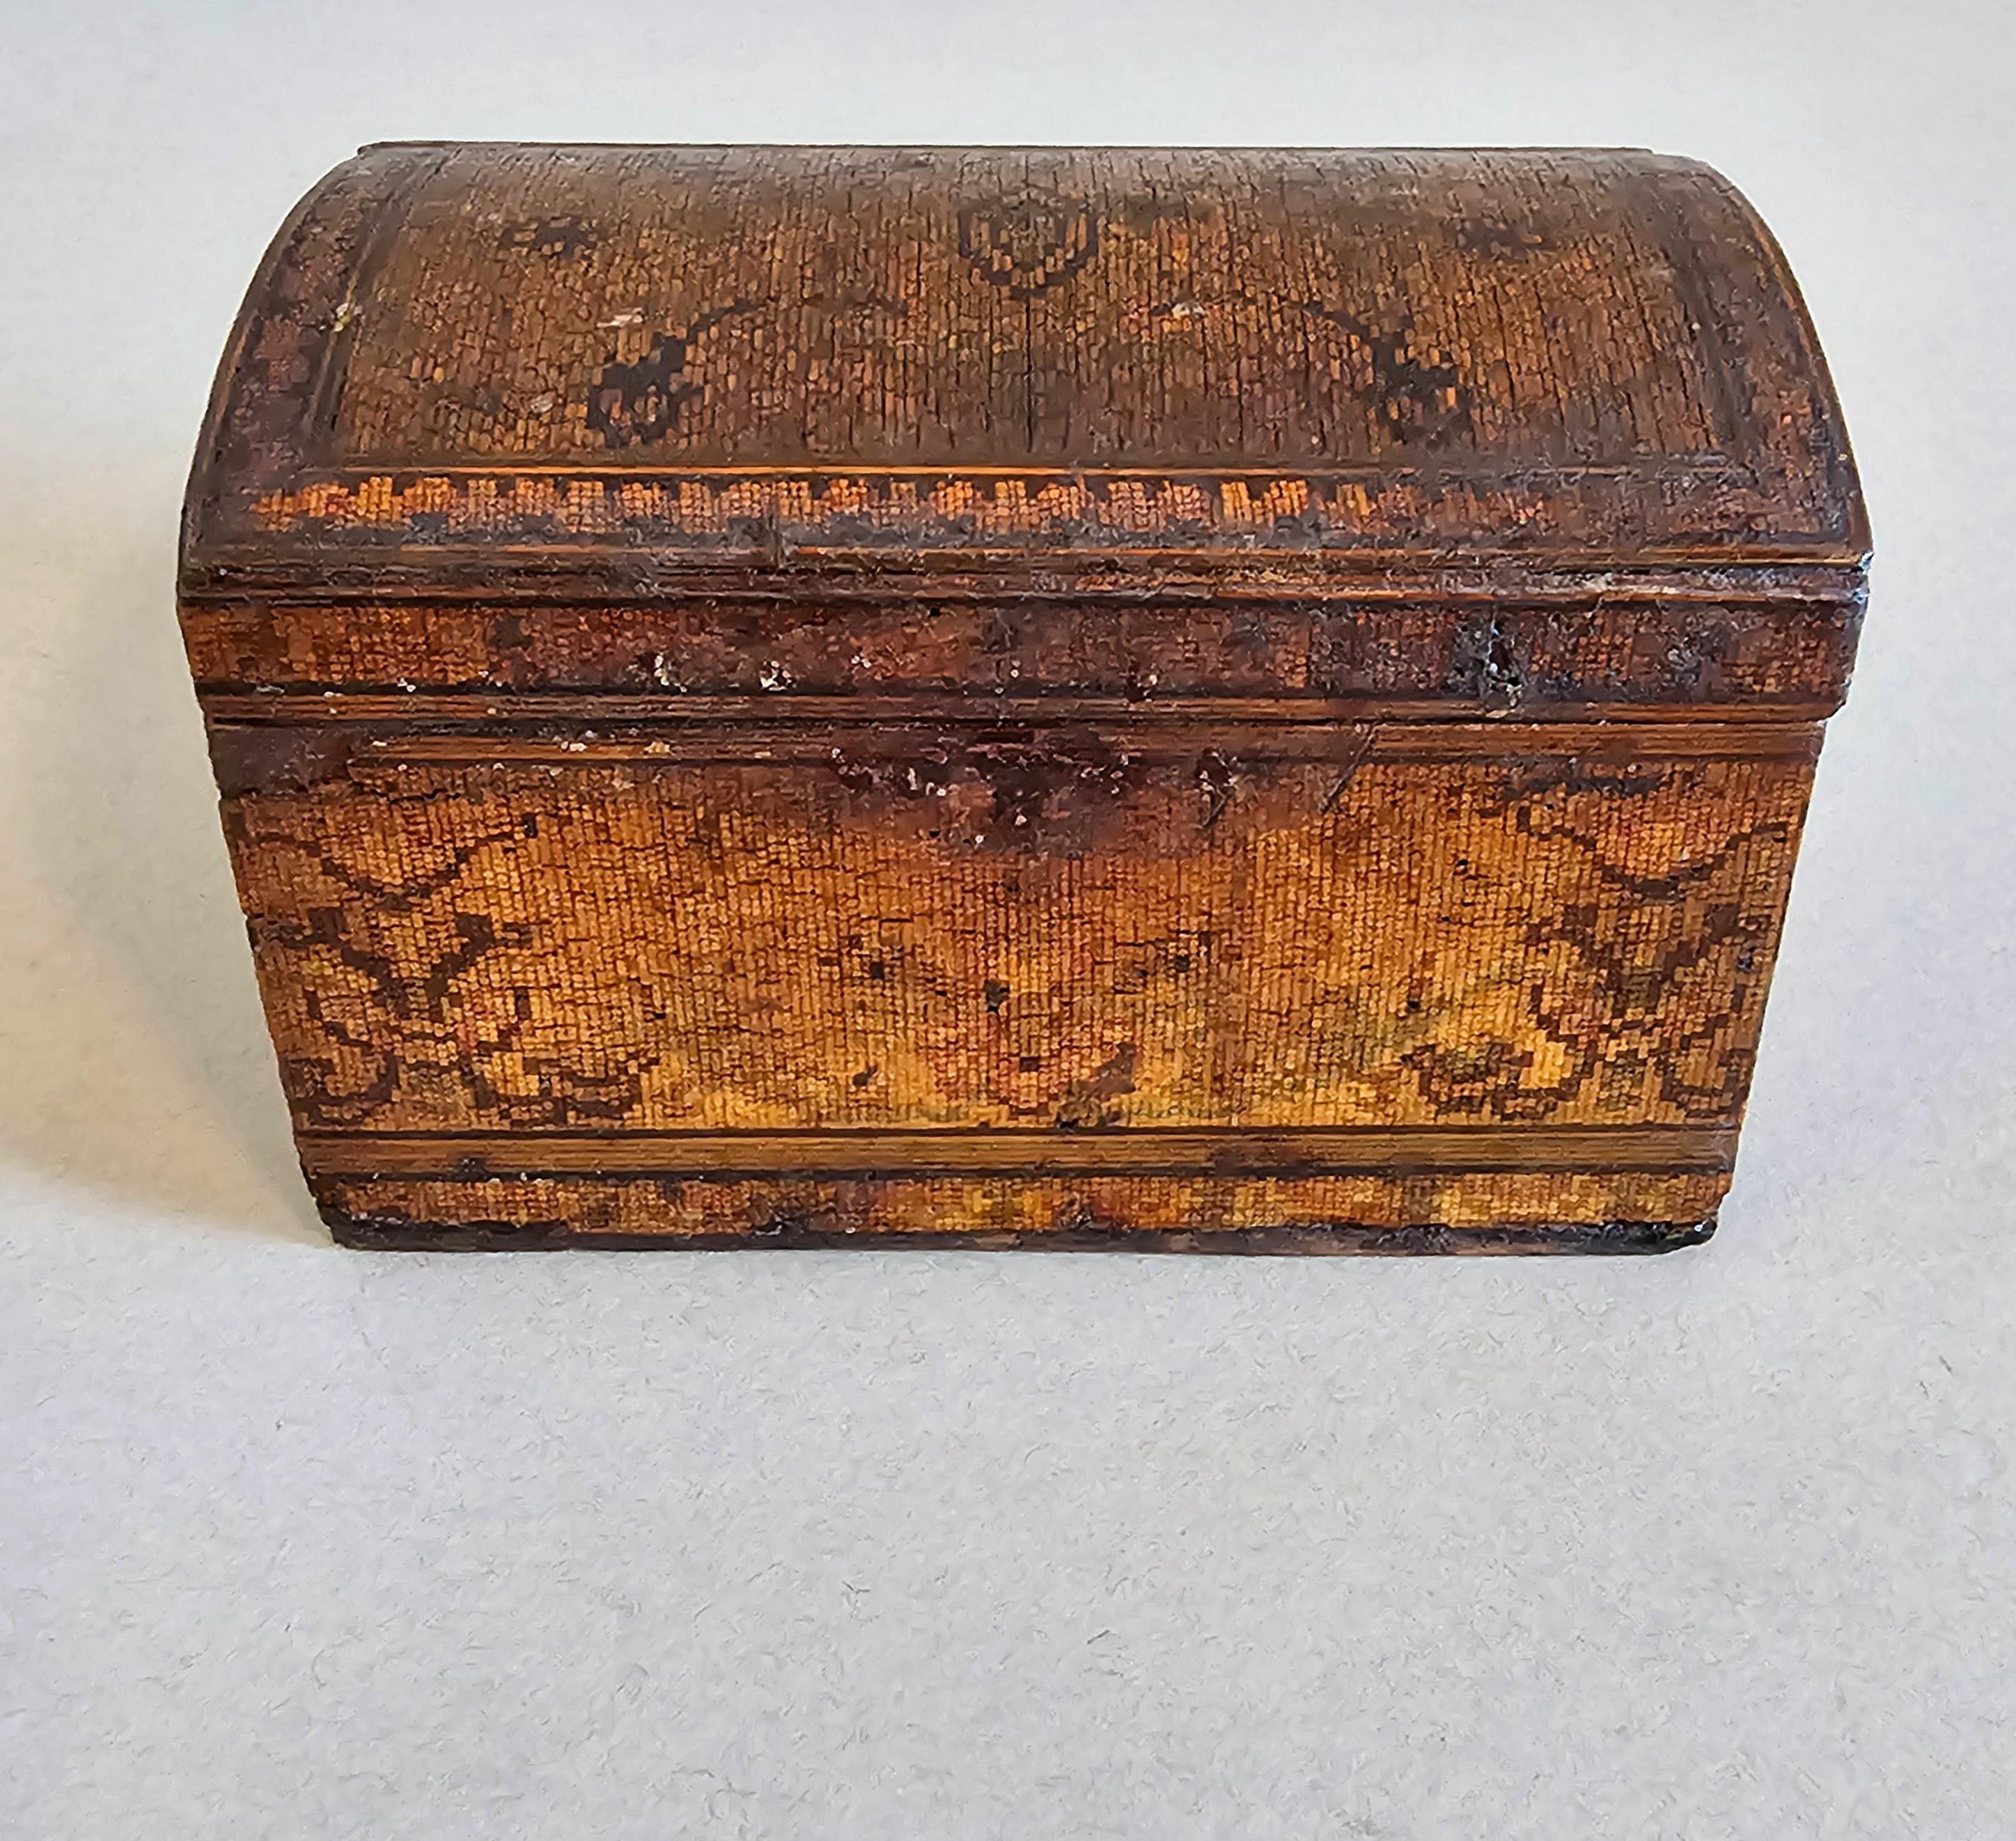 A rare and stunning small mosaic intarsia marquetry inlaid dome-top chest form table box with beautifully aged heavily worn distressed patina. 

Imagine the countless hours it must have taken a highly trained artisan to secure each and every tiny